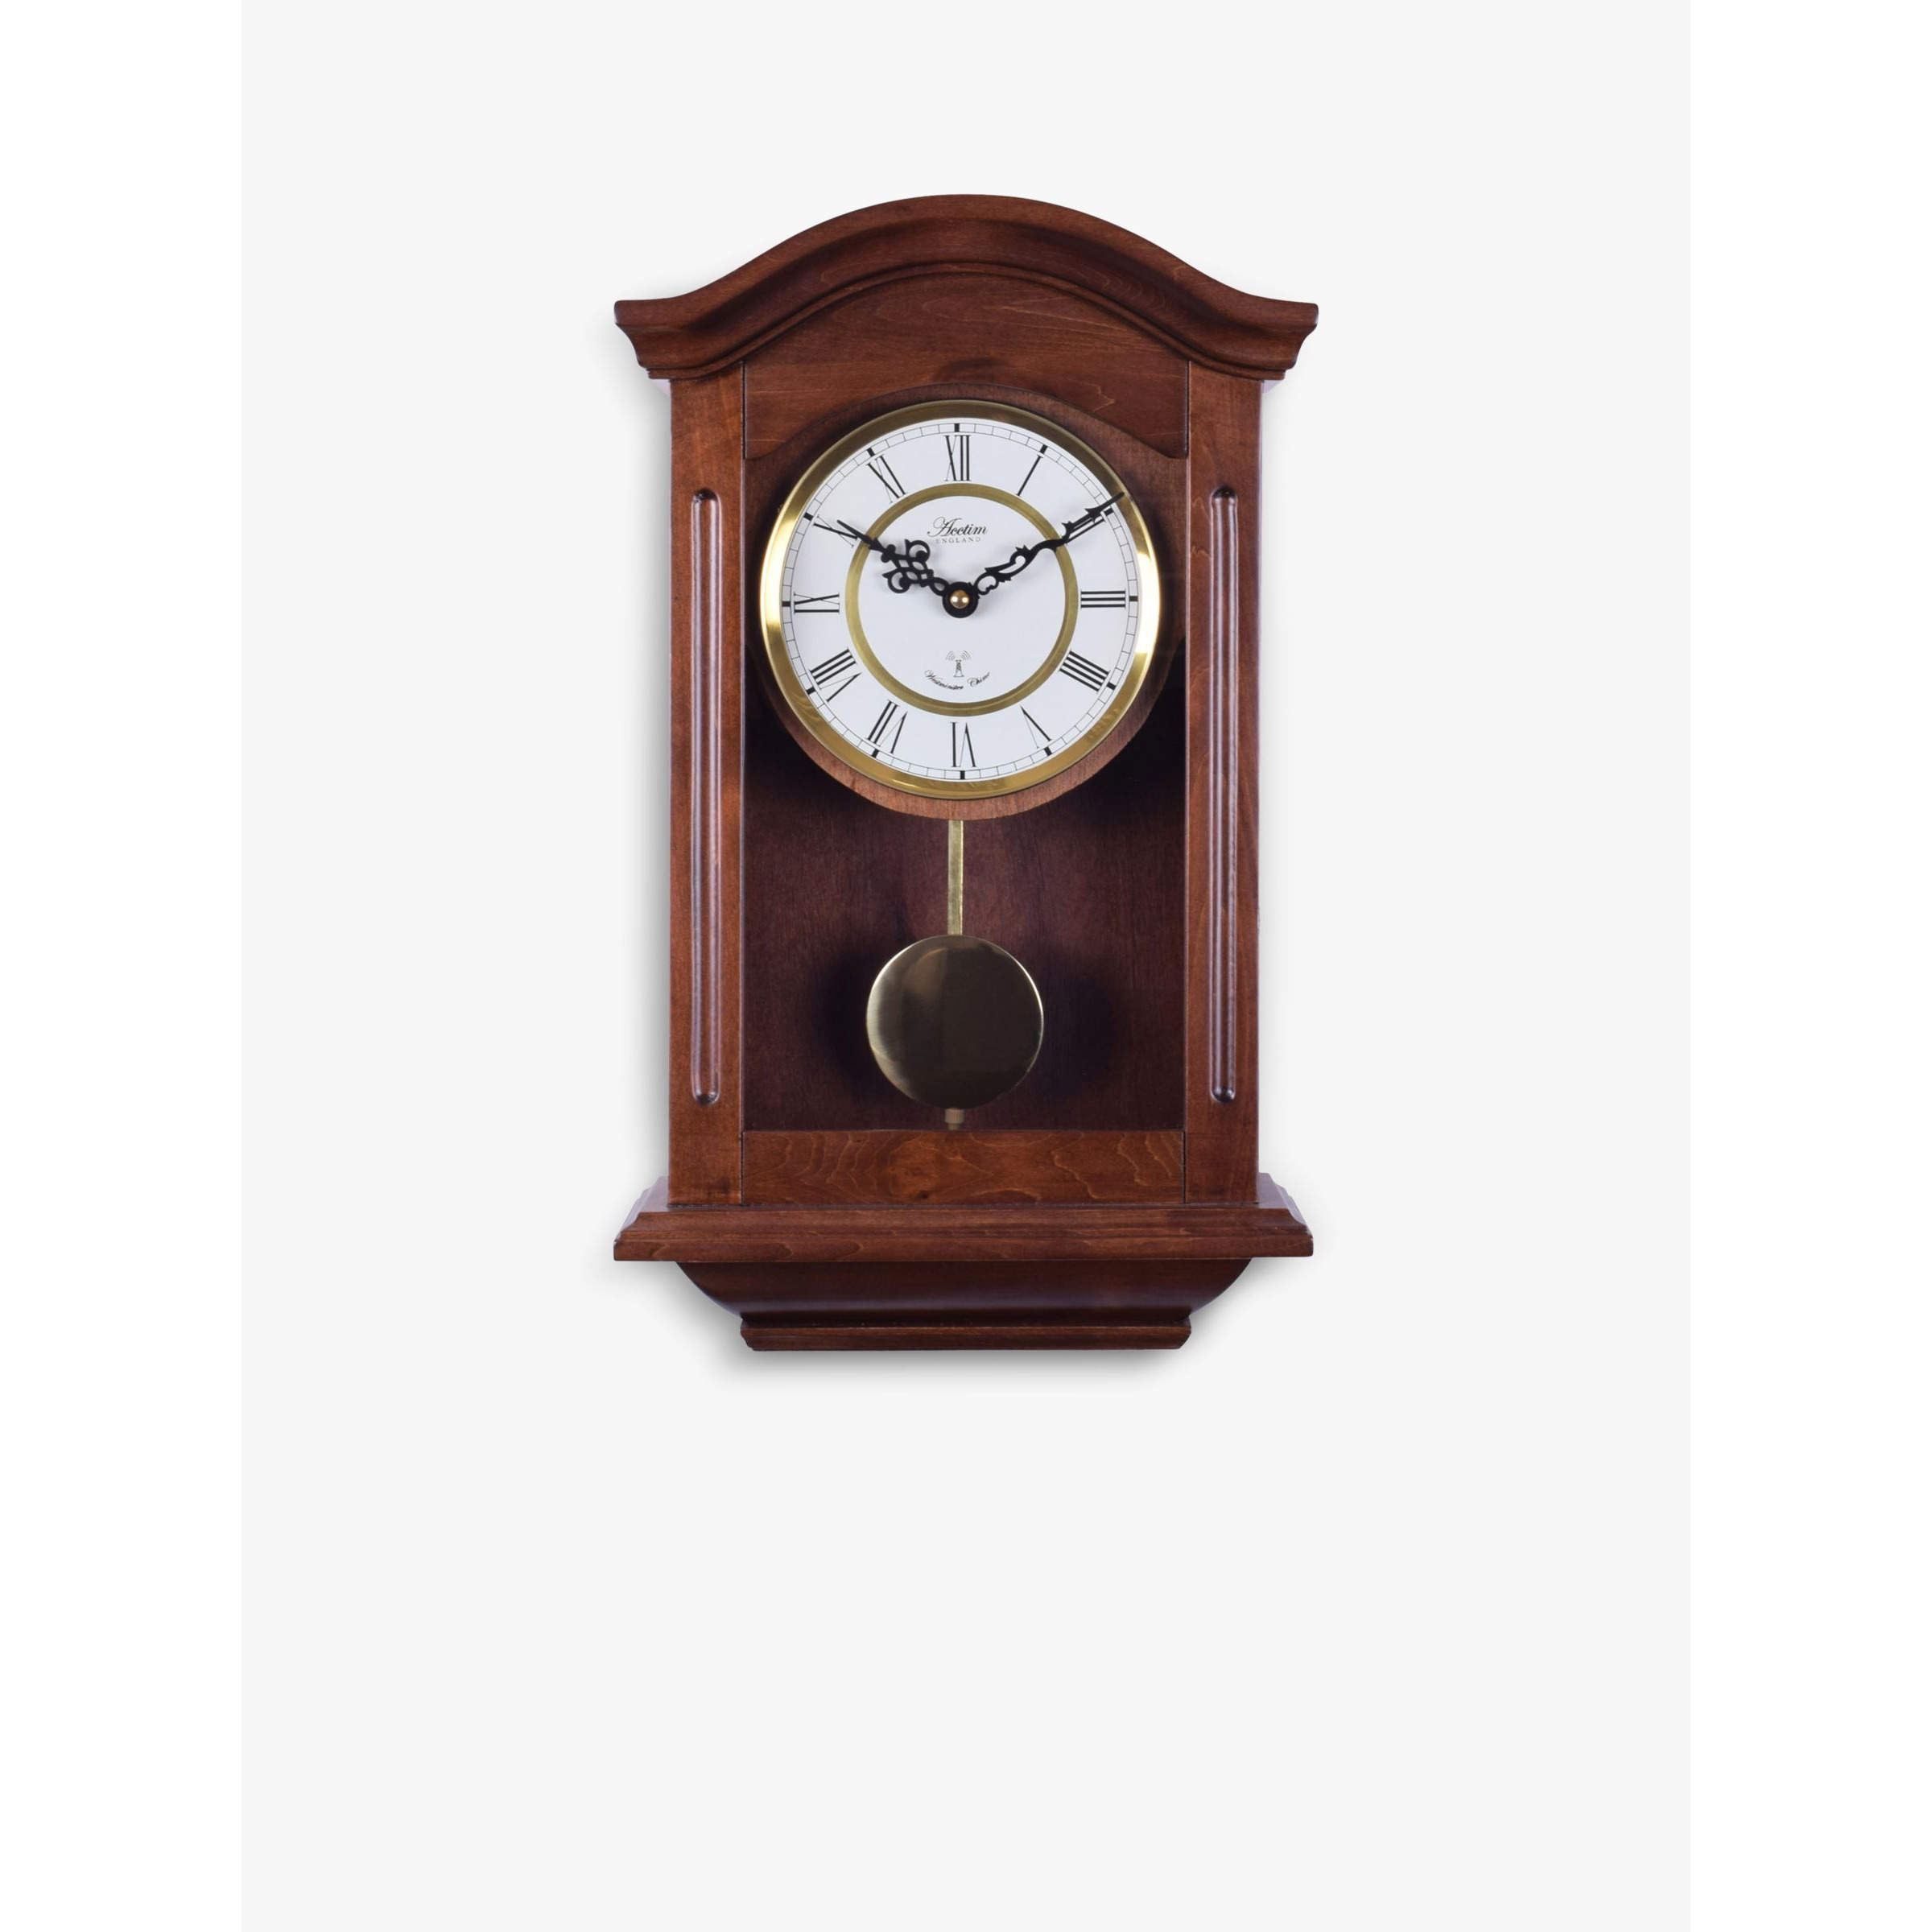 Acctim Thorncroft Radio Controlled Westminster Chime Wood Case Pendulum Wall Clock, Brown - image 1